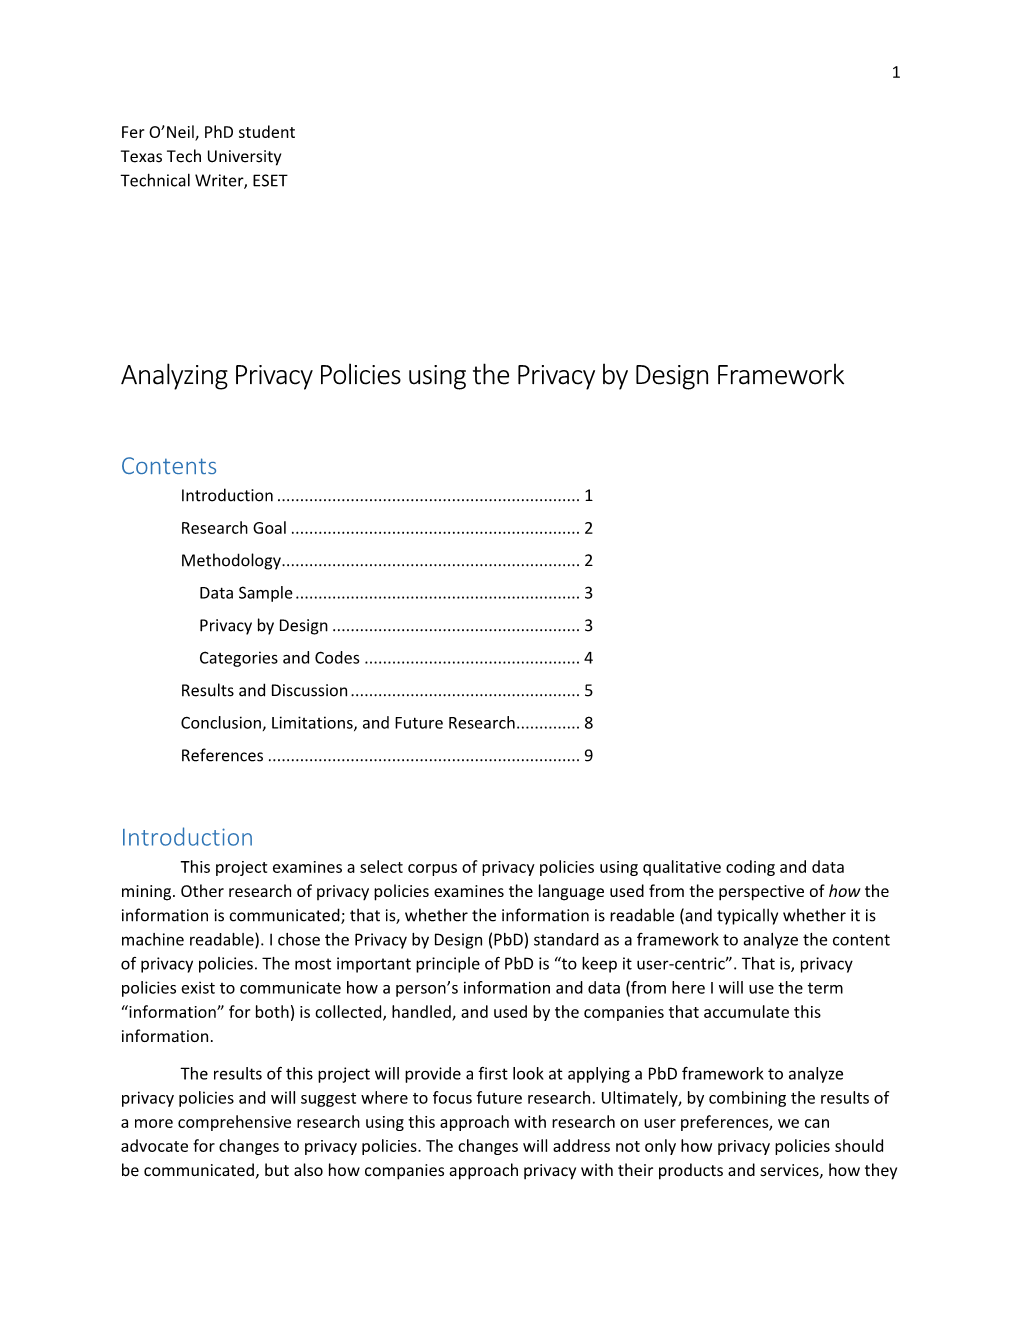 Analyzing Privacy Policies Using the Privacy by Design Framework